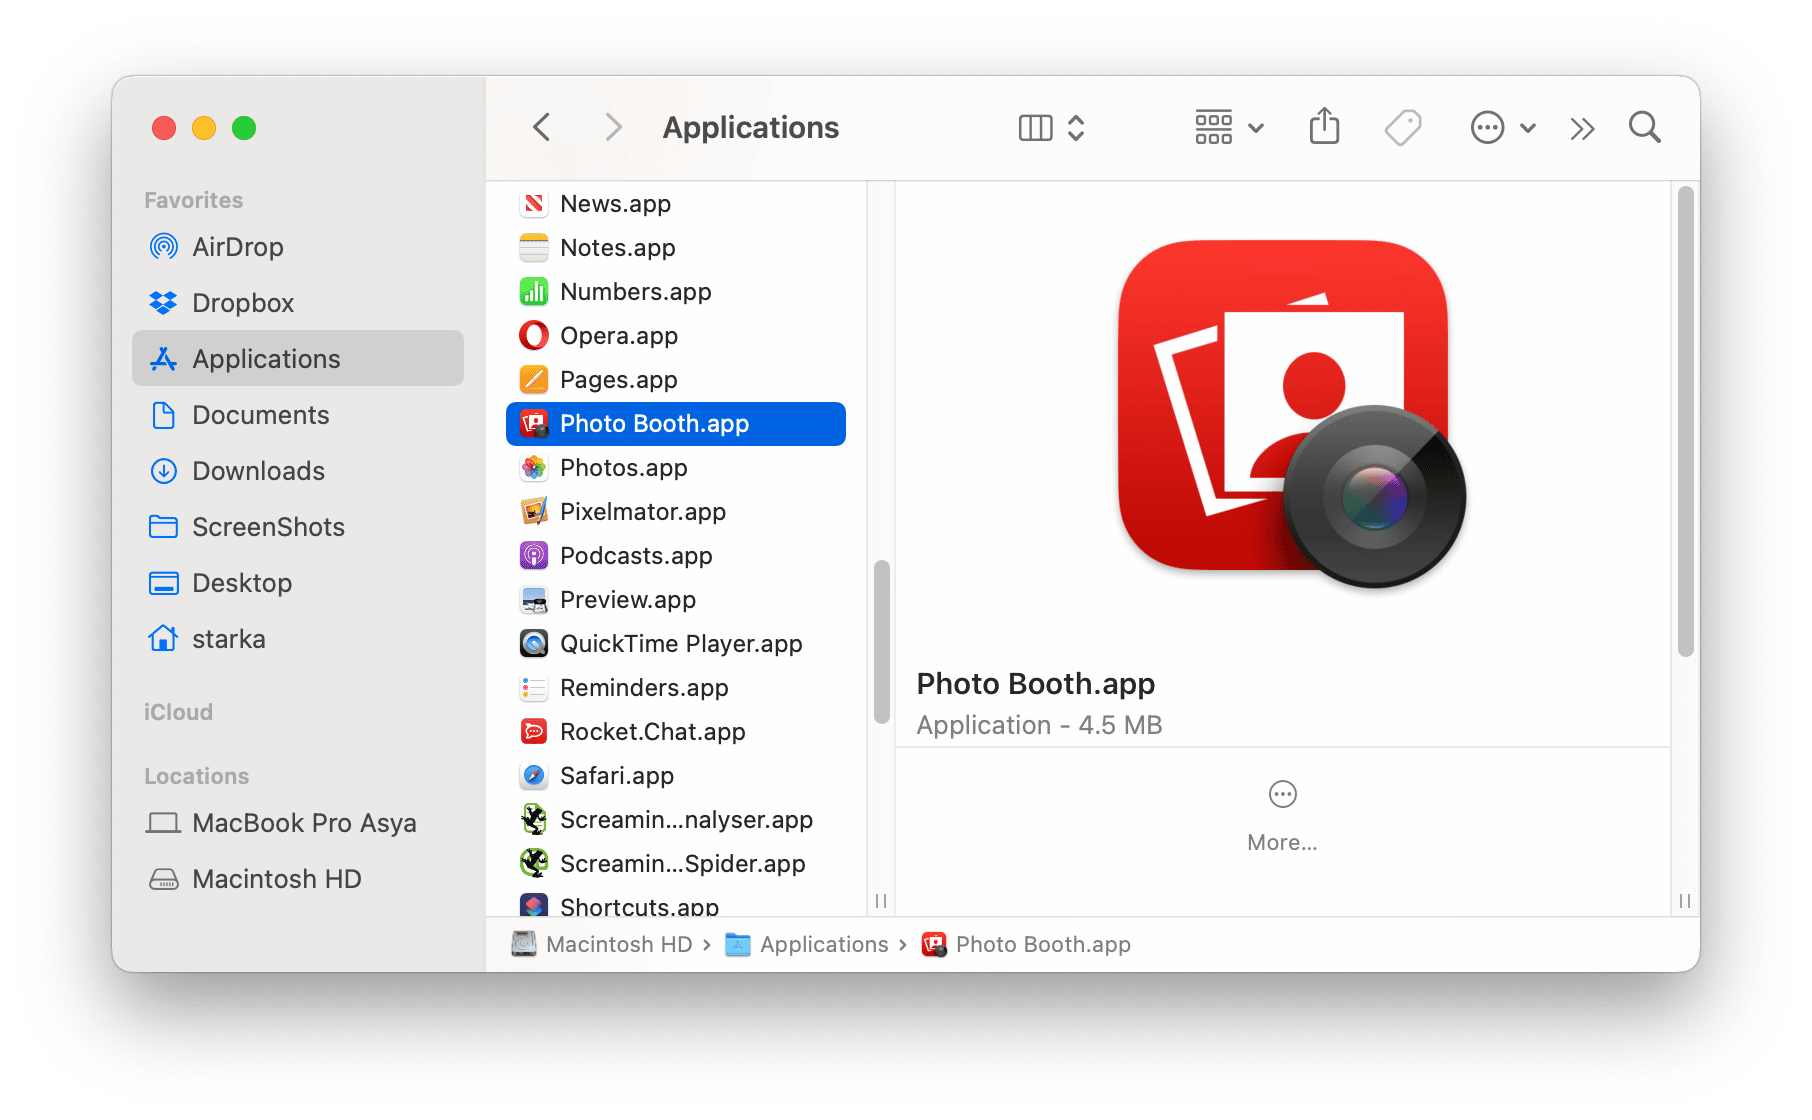 applications folder showing Photo Booth